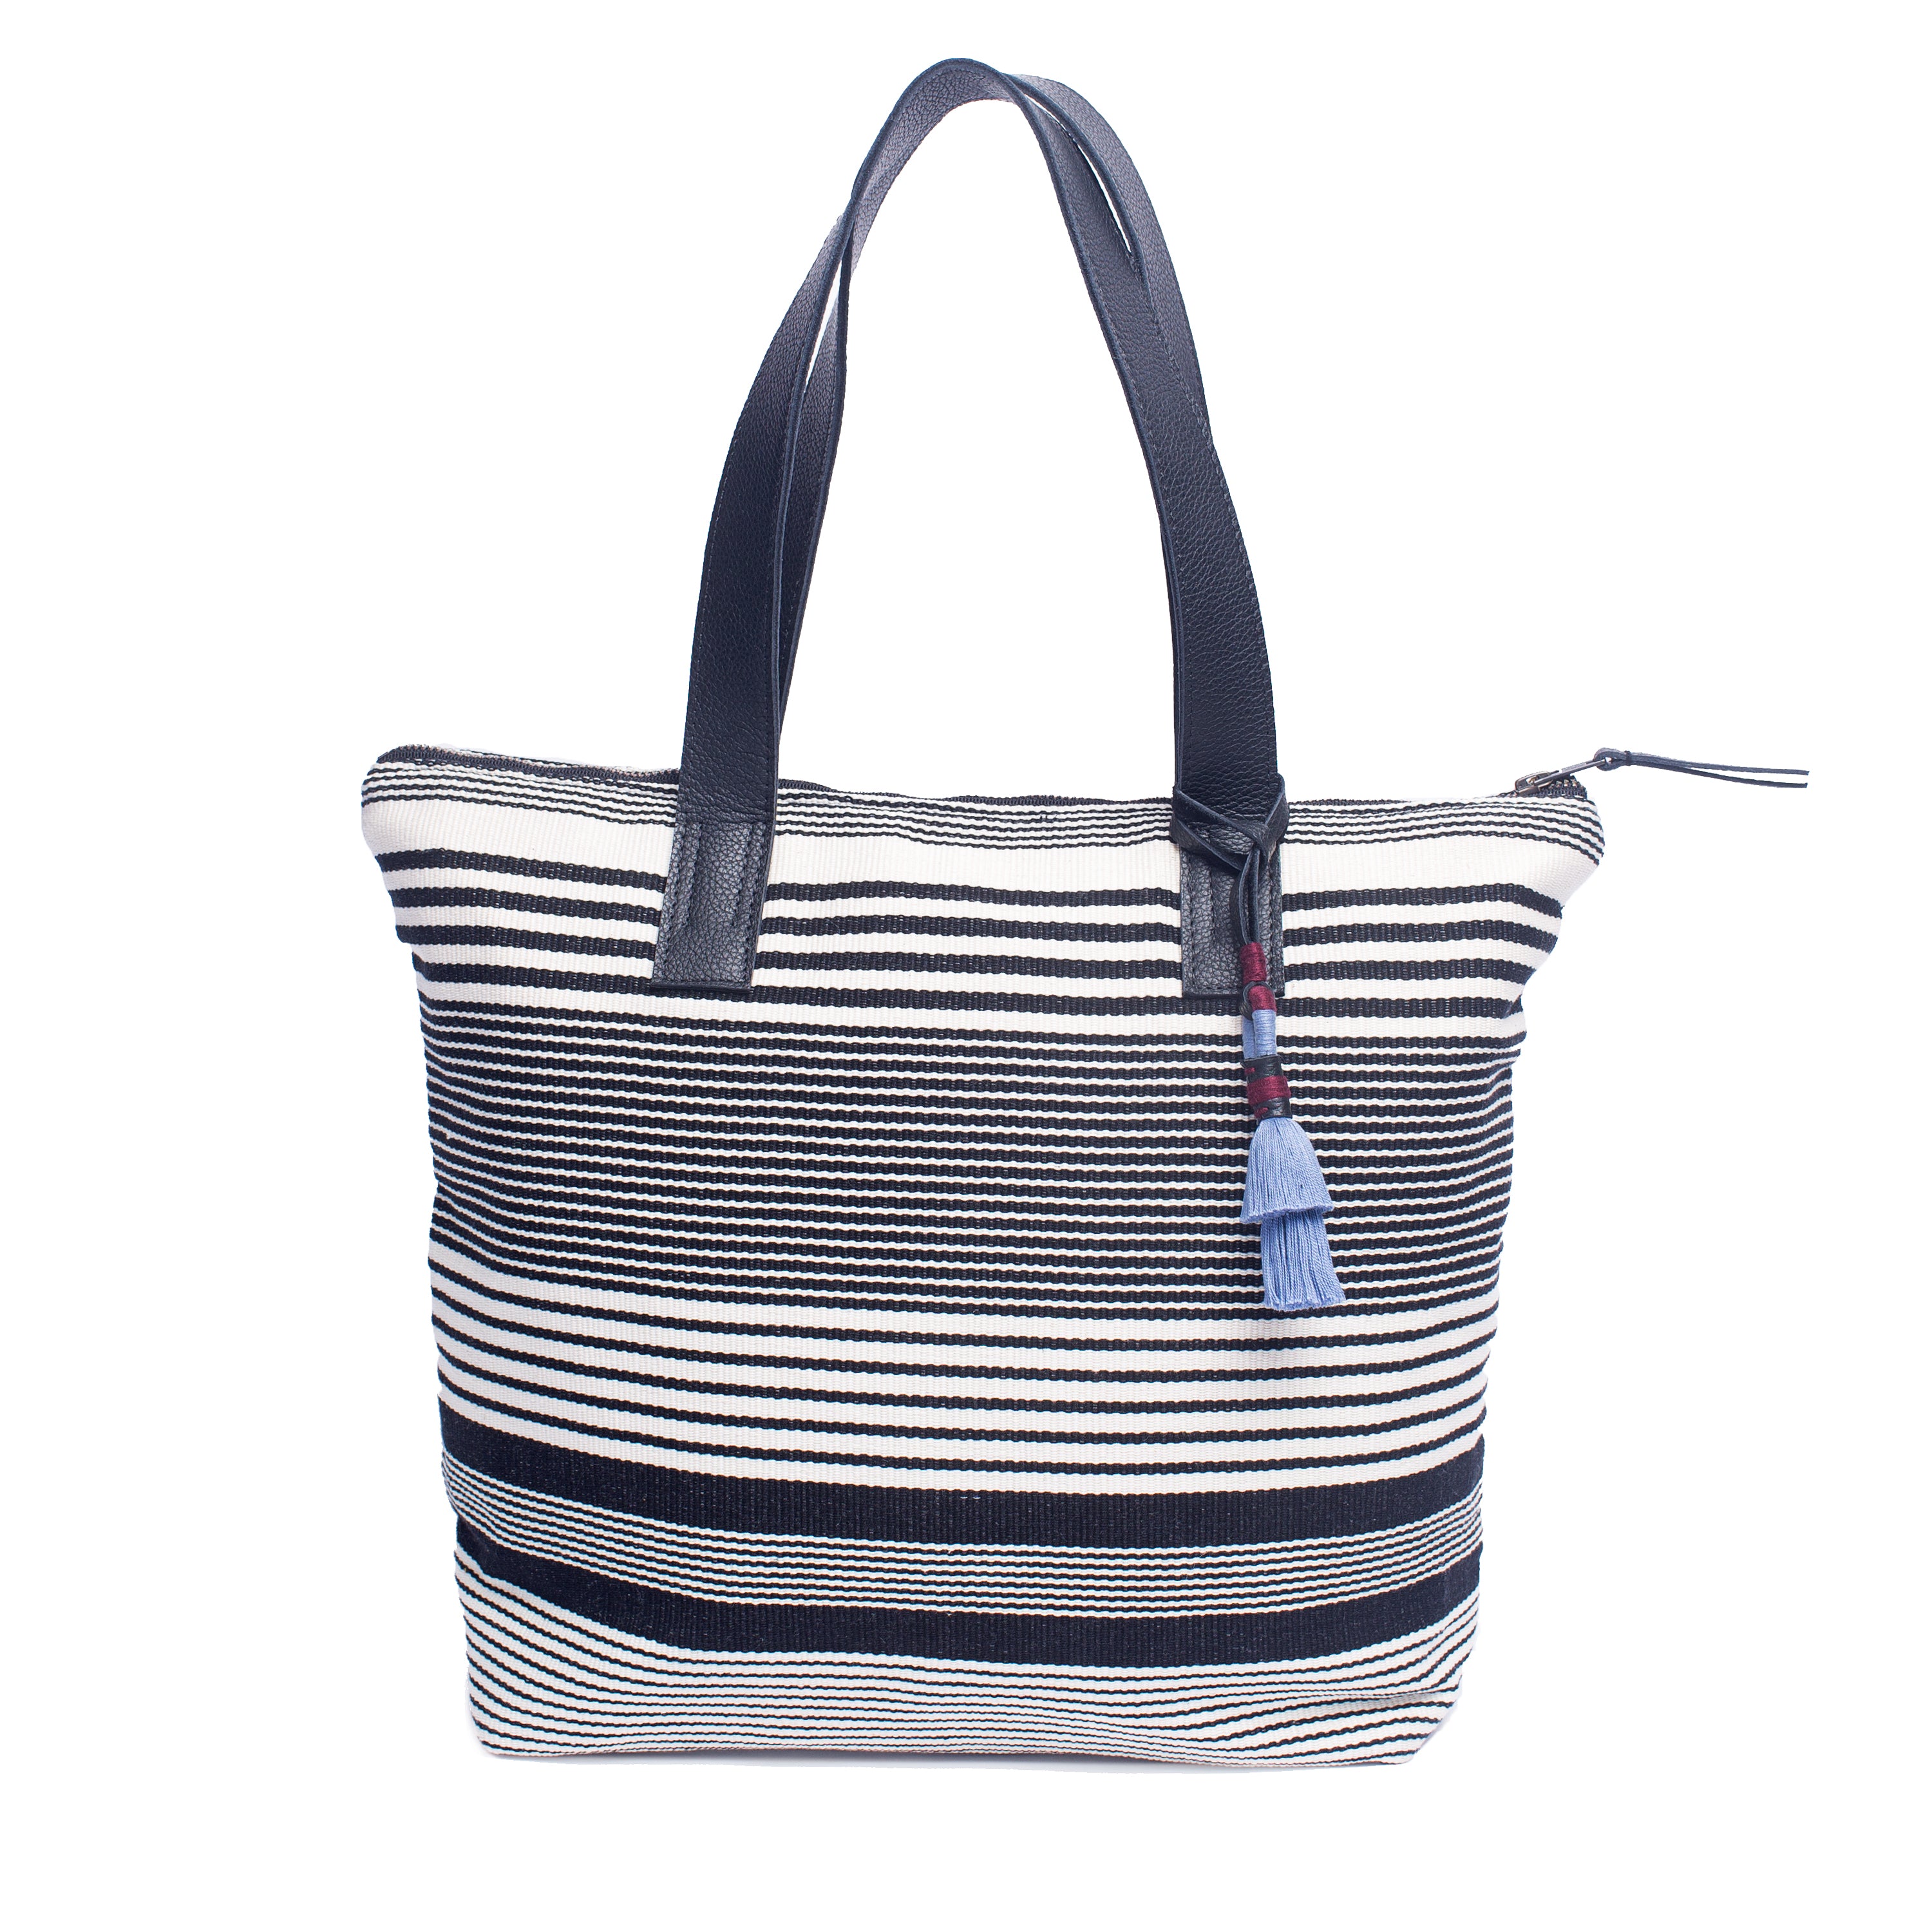 Angela  Handwoven artisan Angela Tote in Black White Stripes. It has leather handles and a light blue tassel.